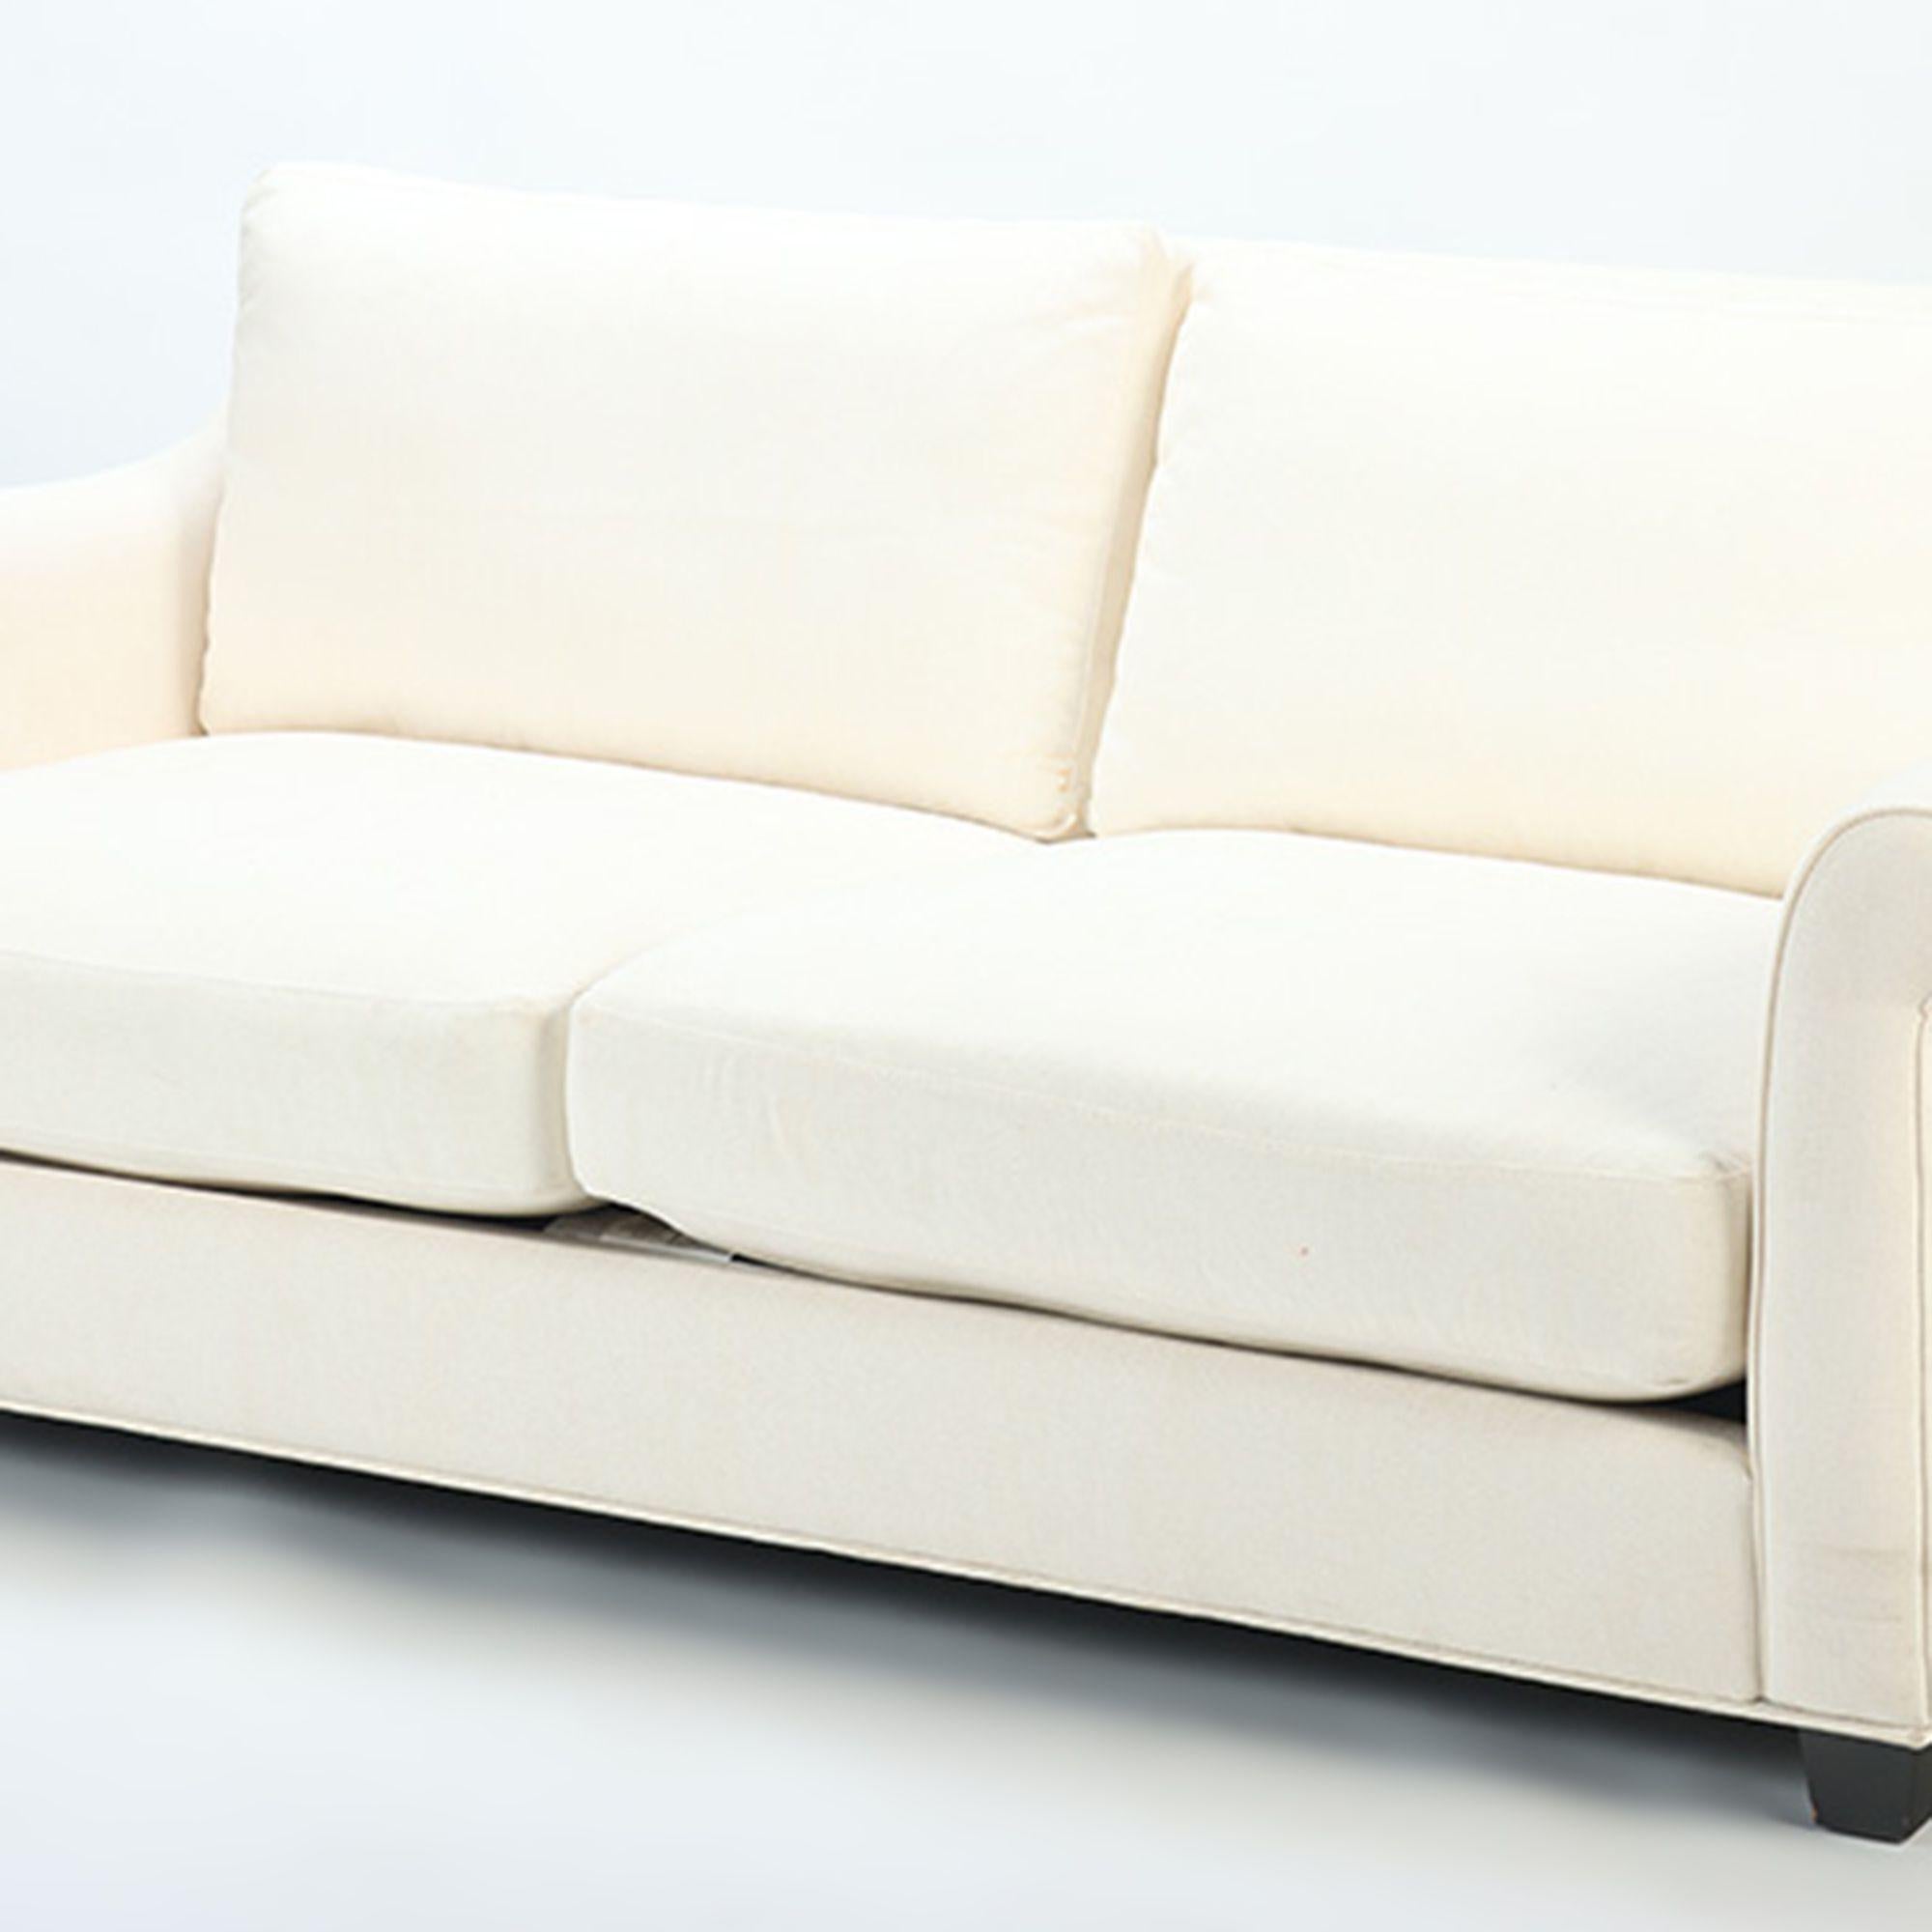 A custom made white two seat sofa with Jonathan Luis, Inc label, CA. circa 1995.